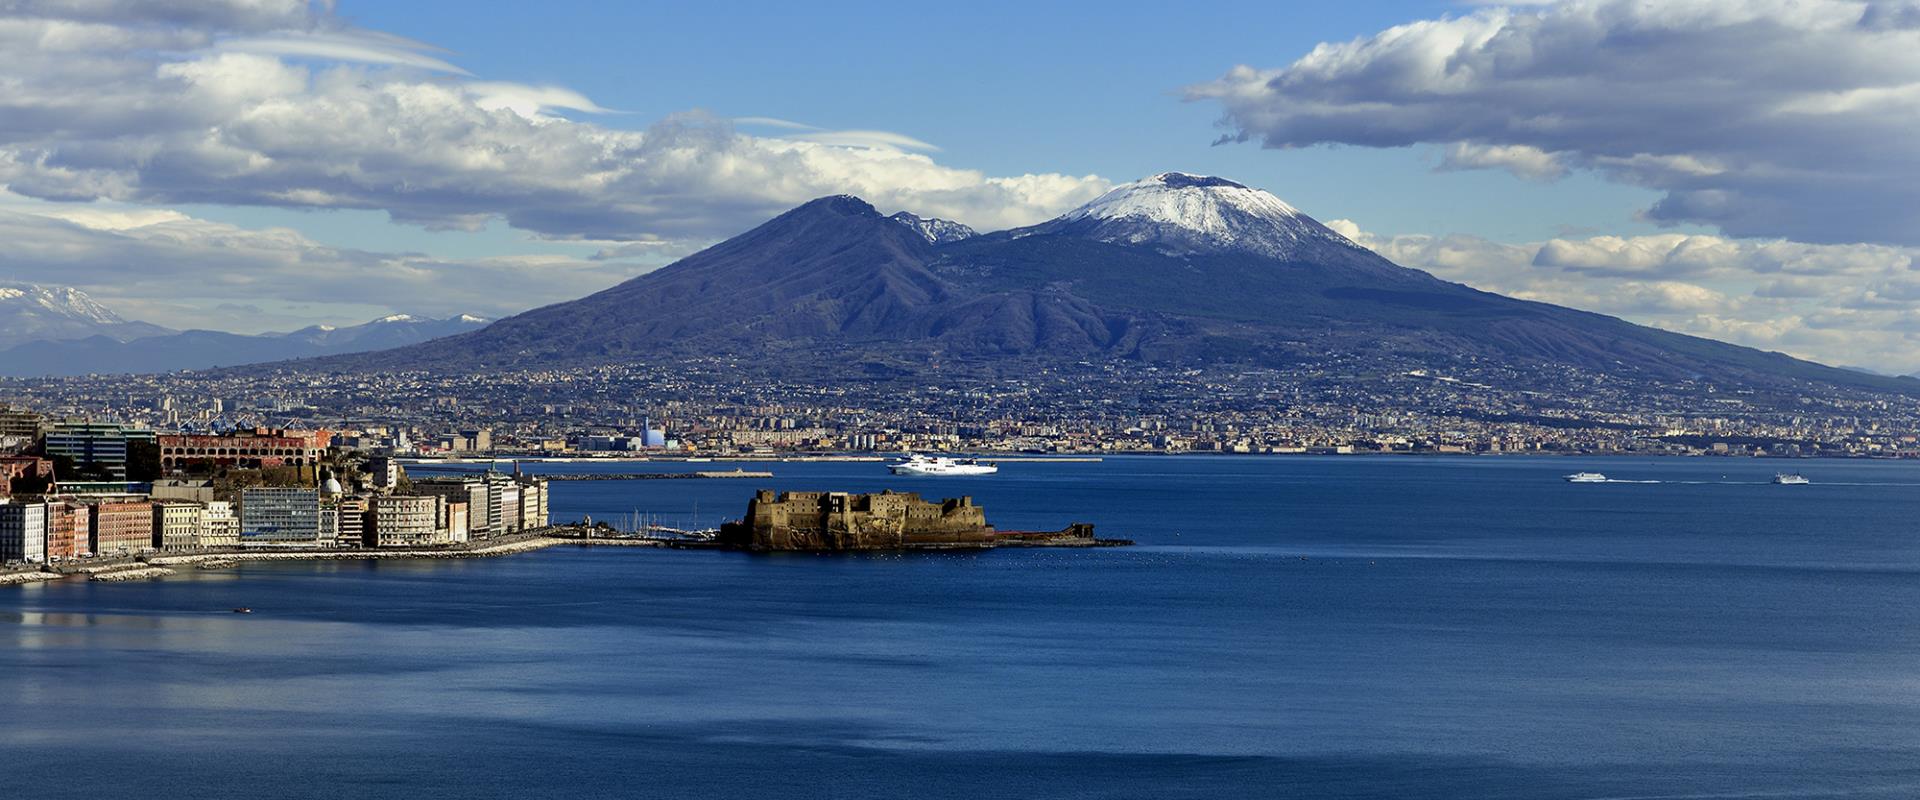 The wonderful view of the Gulf of Naples from Hotel Posillipo